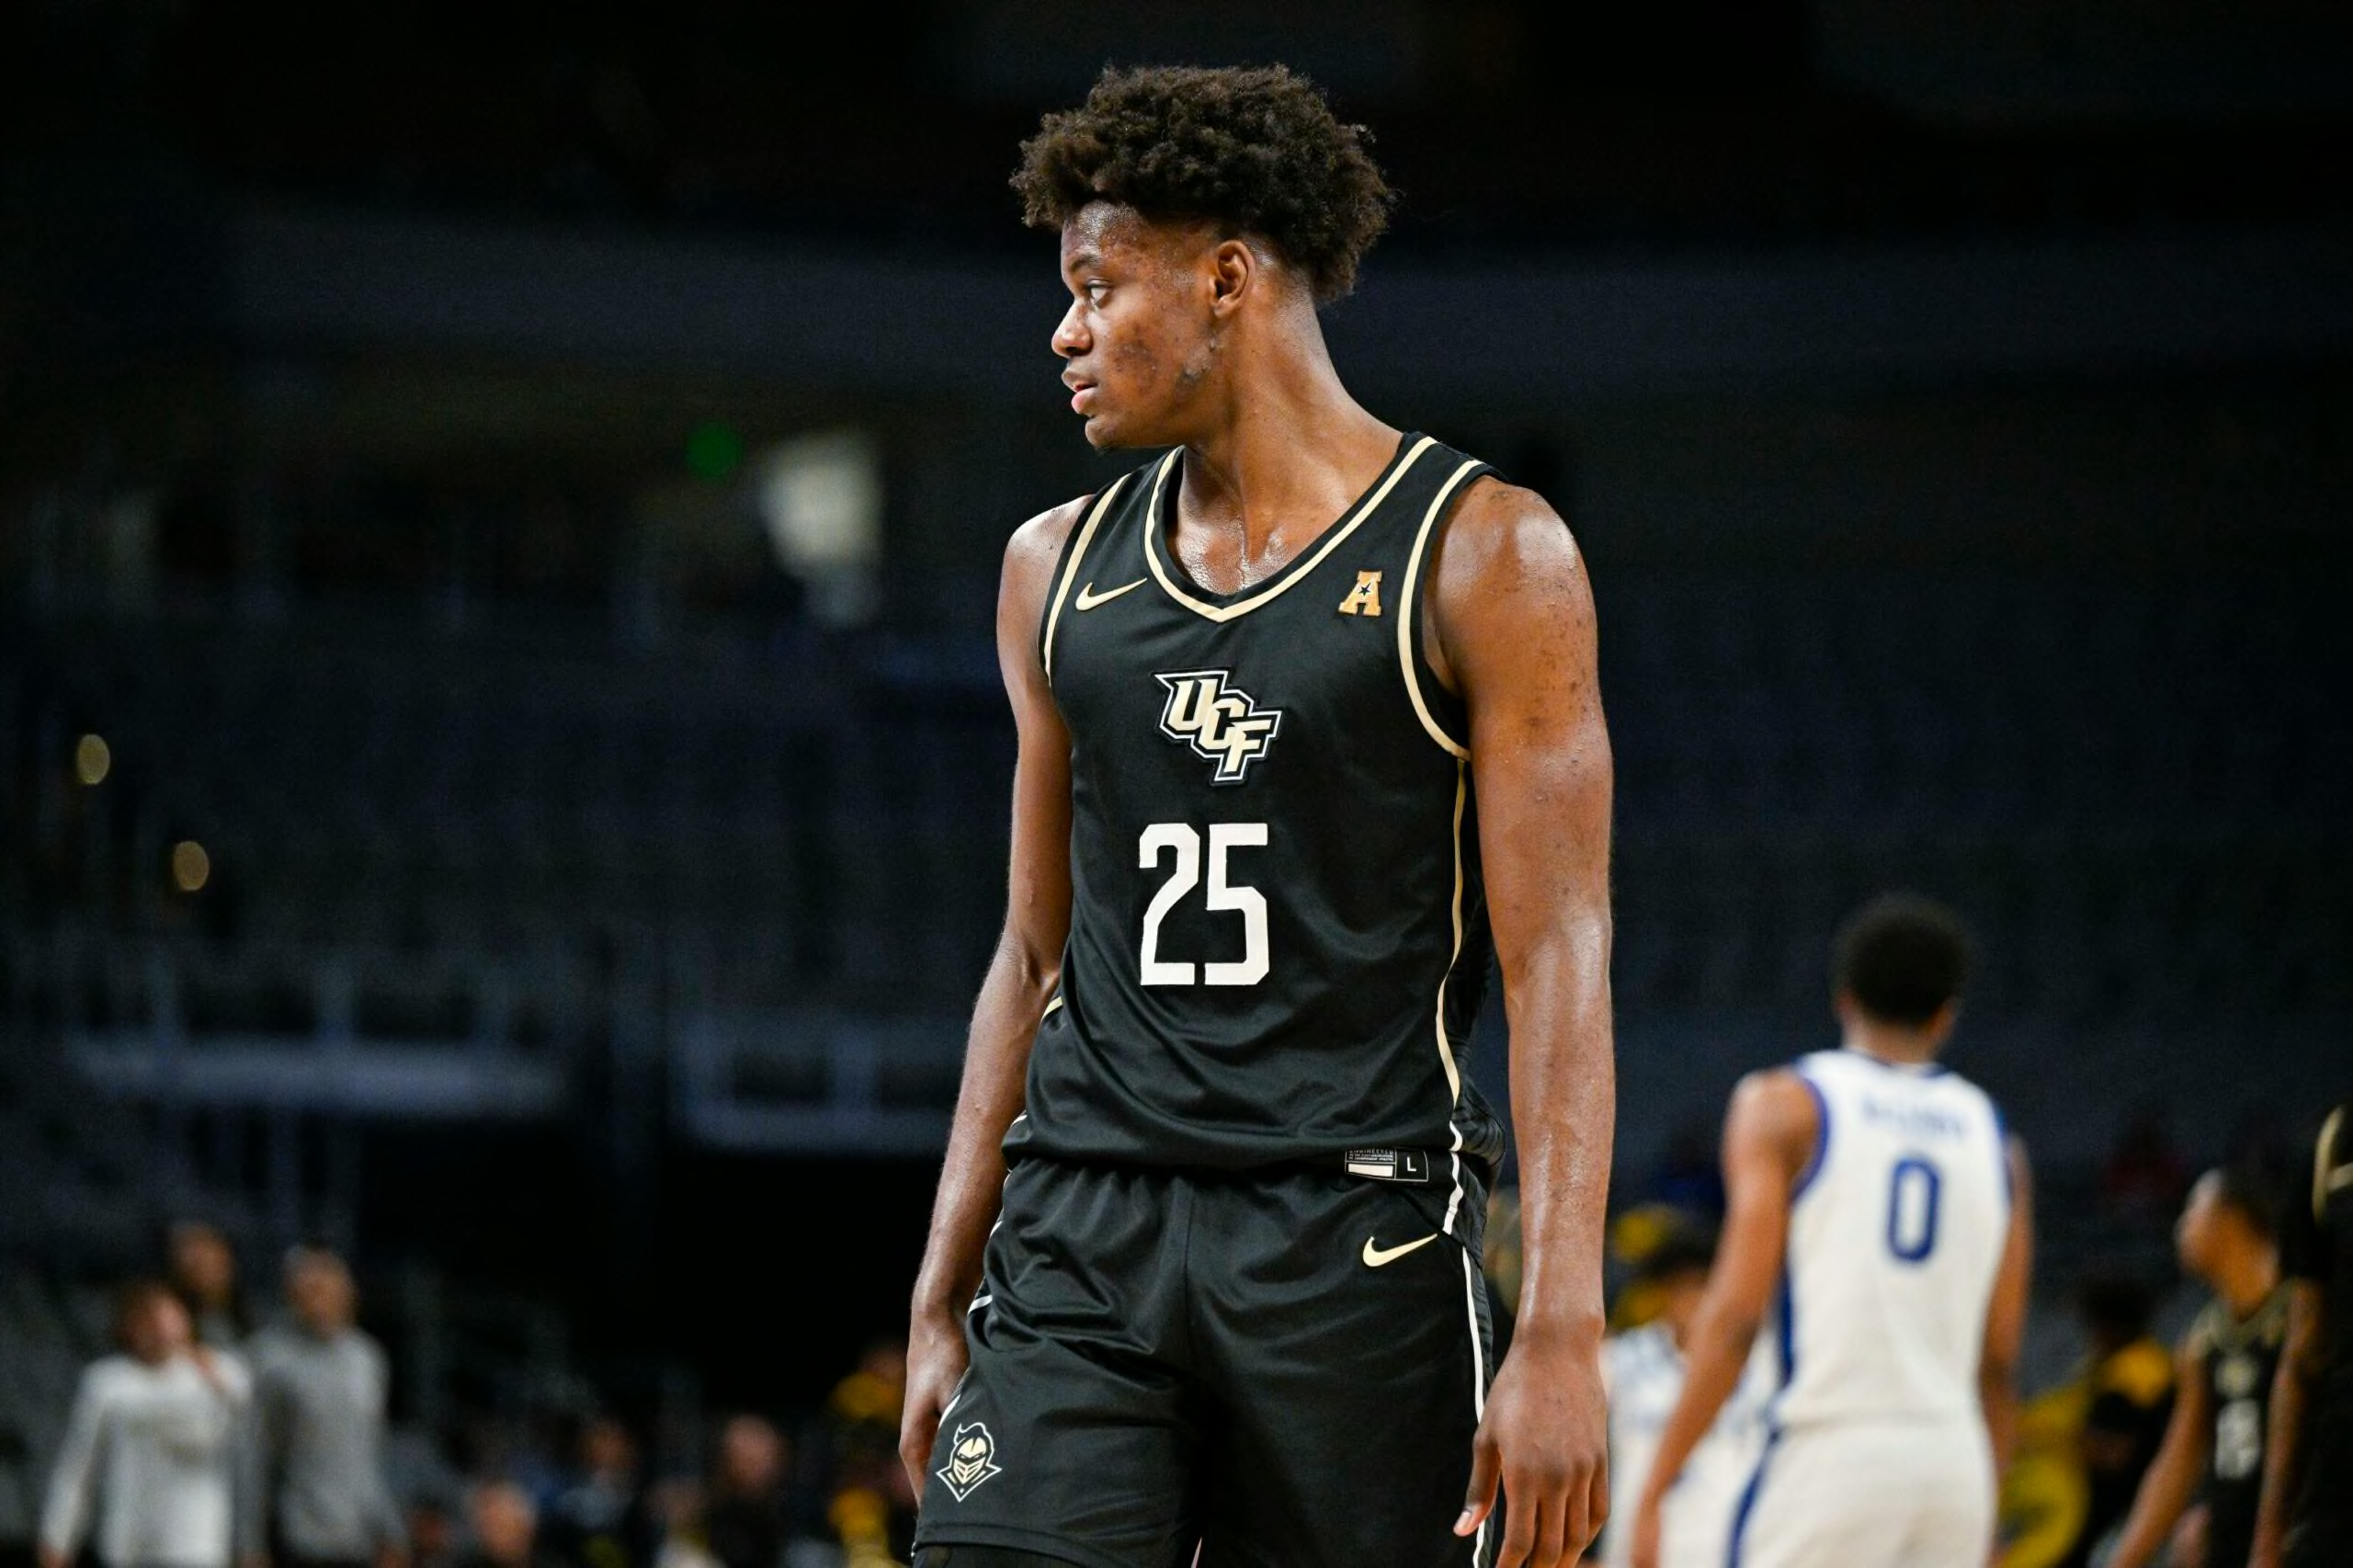 UCF Men's Hoops on X: Jermaine made his first NBA start against